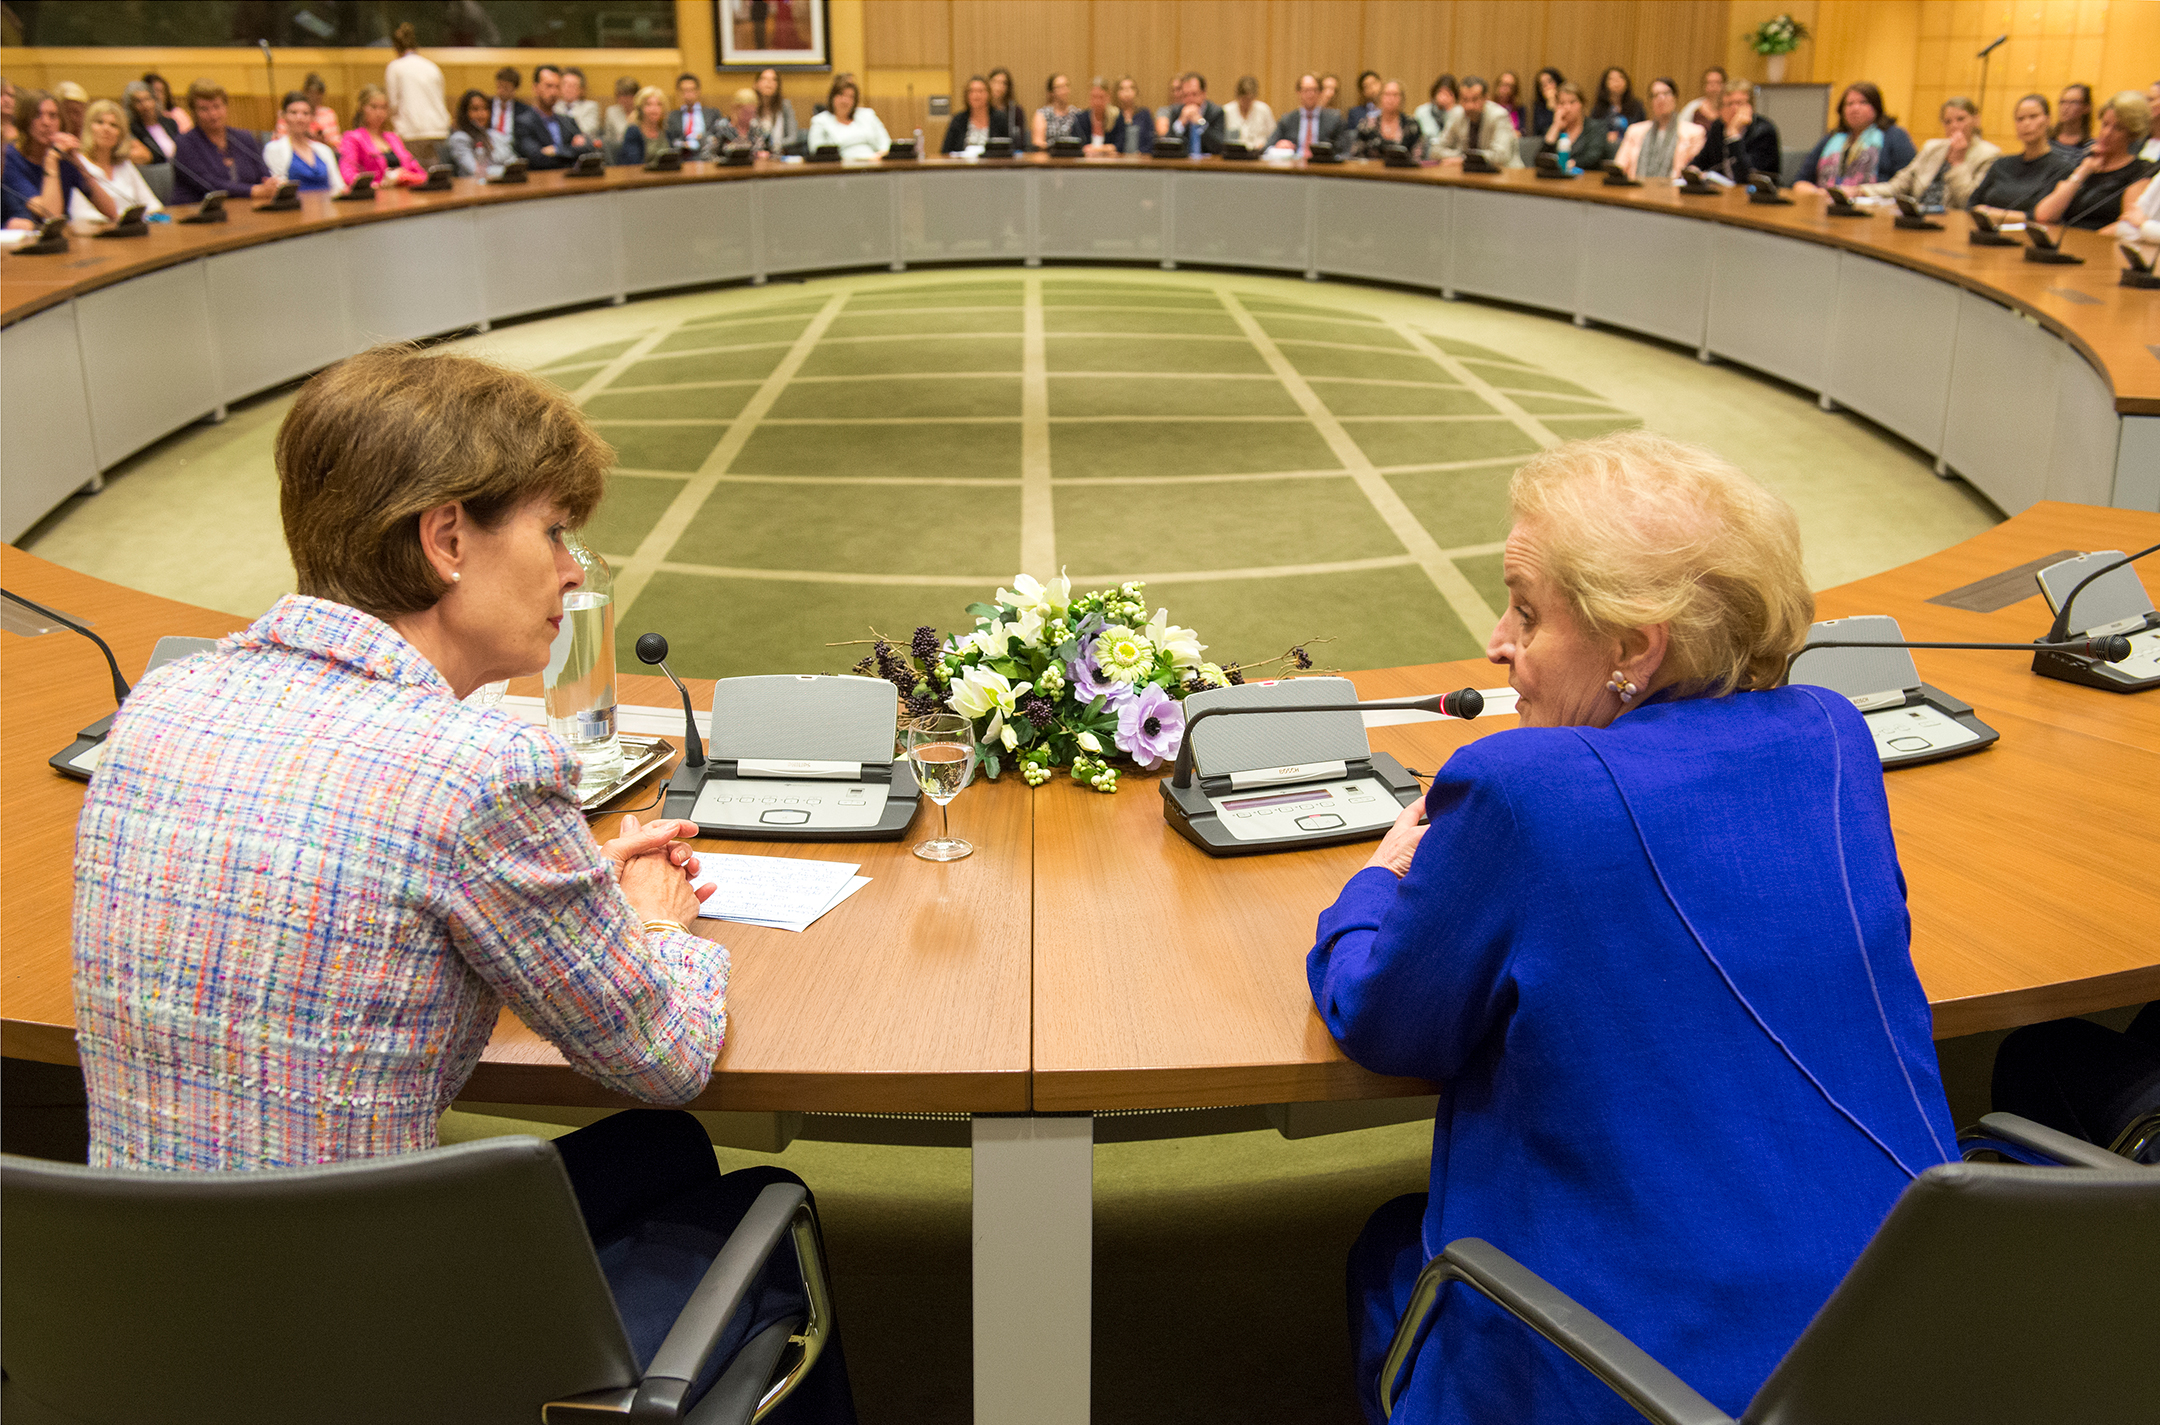 Madeleine Albright, at right, speaking to a woman as they sit at the head of a large ovular table